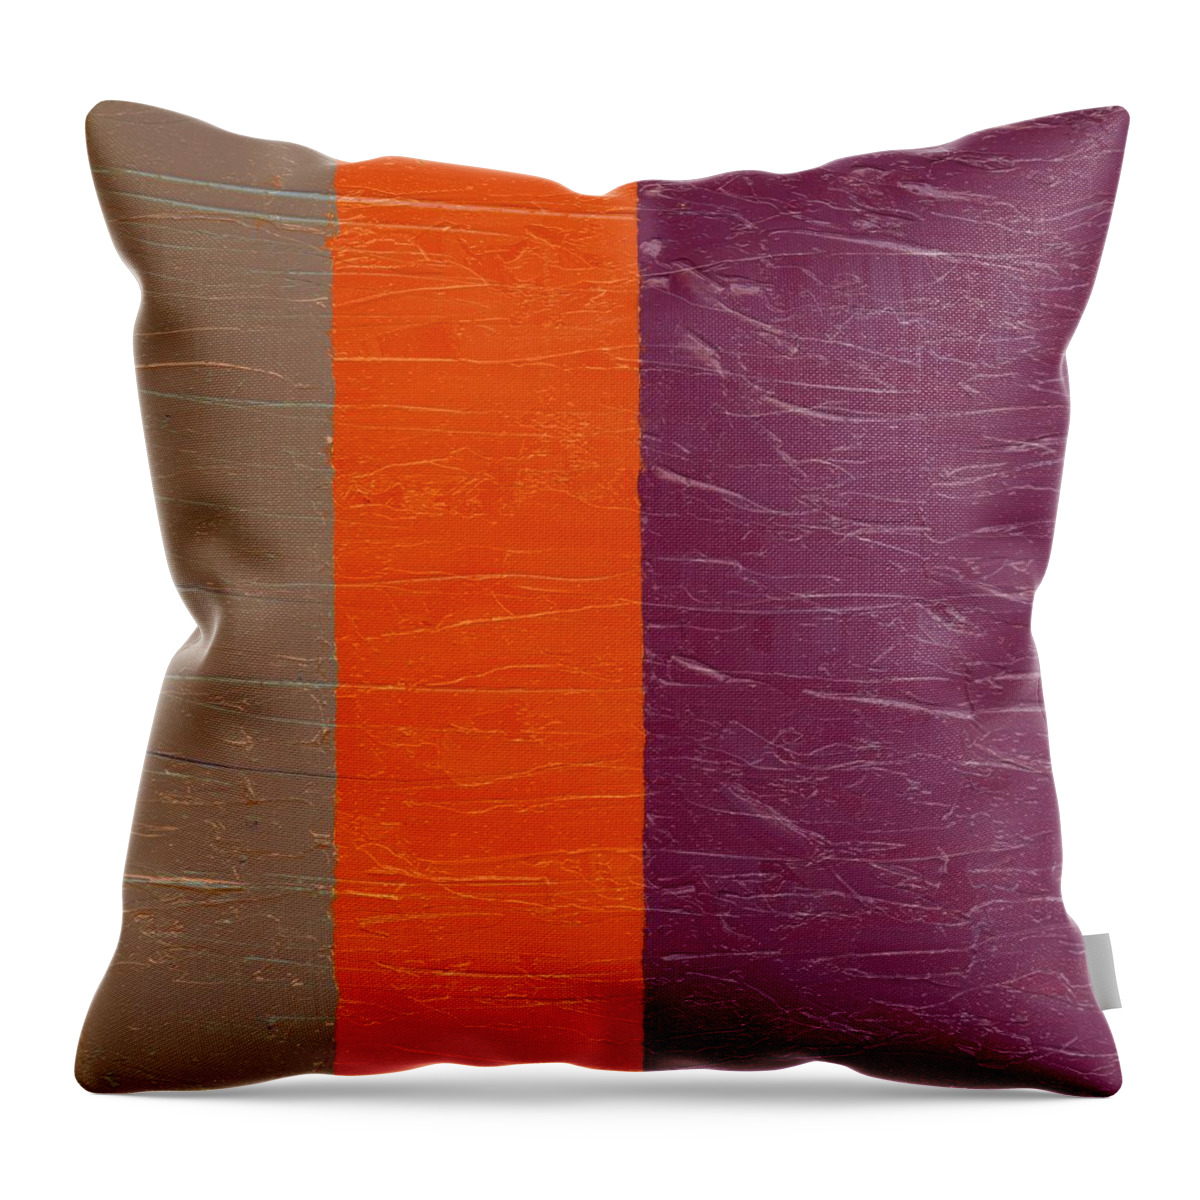 Stripes Throw Pillow featuring the painting Grey Orange Purple by Michelle Calkins